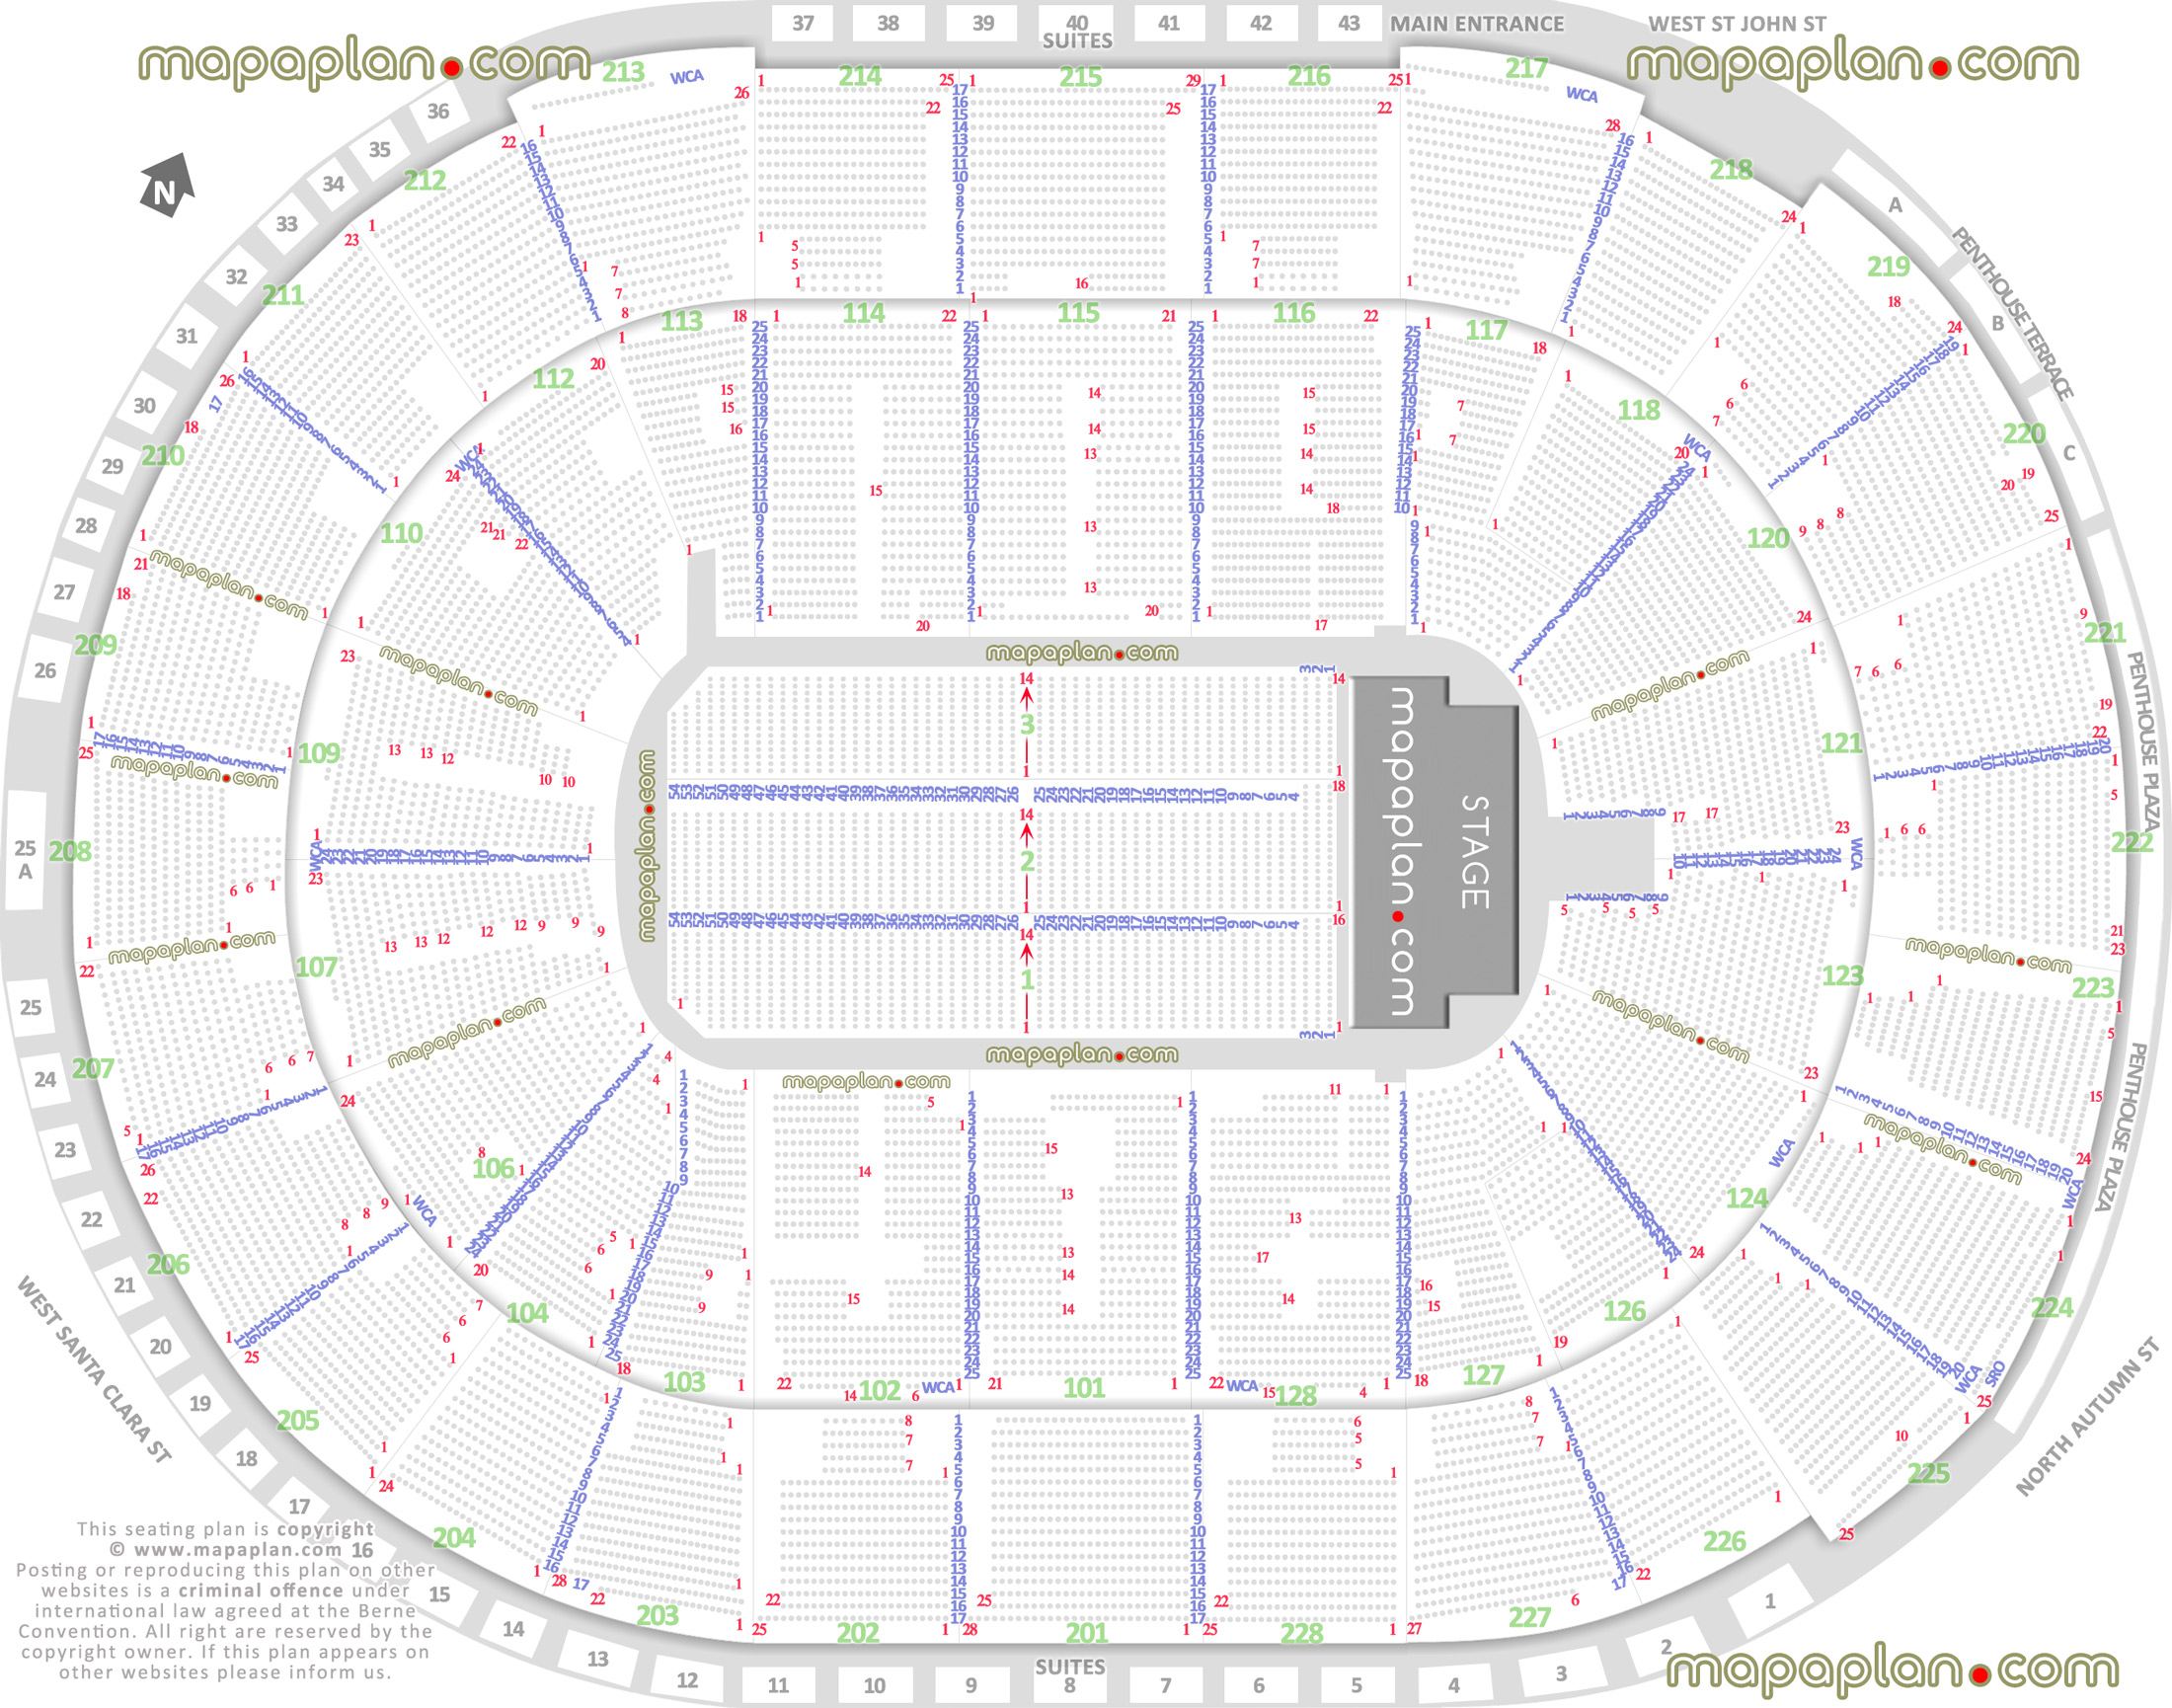 detailed seat row numbers end stage concert sections floor plan map arena lower upper level layout San Jose SAP Center seating chart